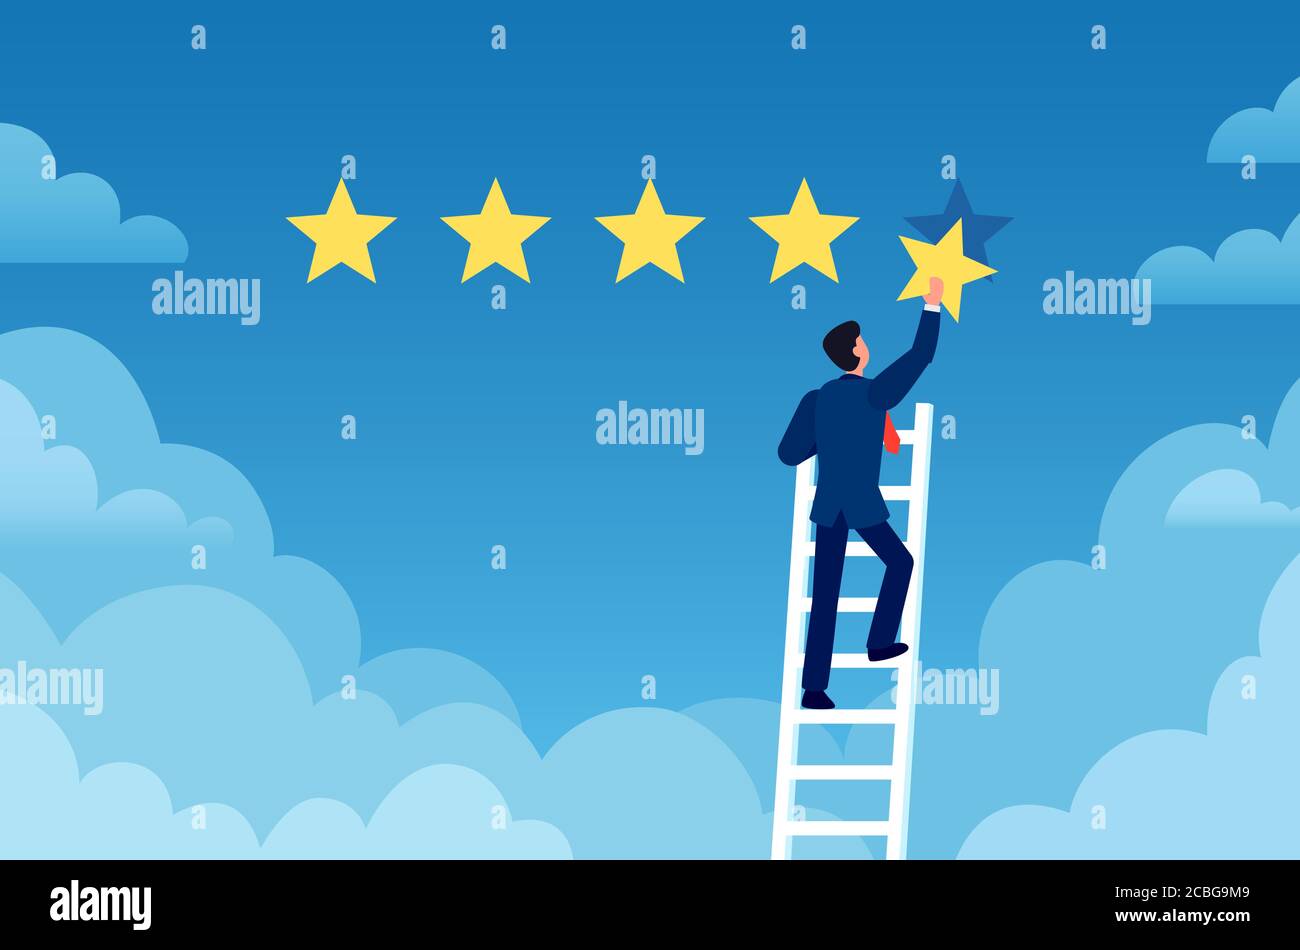 Customer rating. Businessman stands on ladder and gives 5 star, customer feedback. Positive review evaluation system vector concept Stock Vector